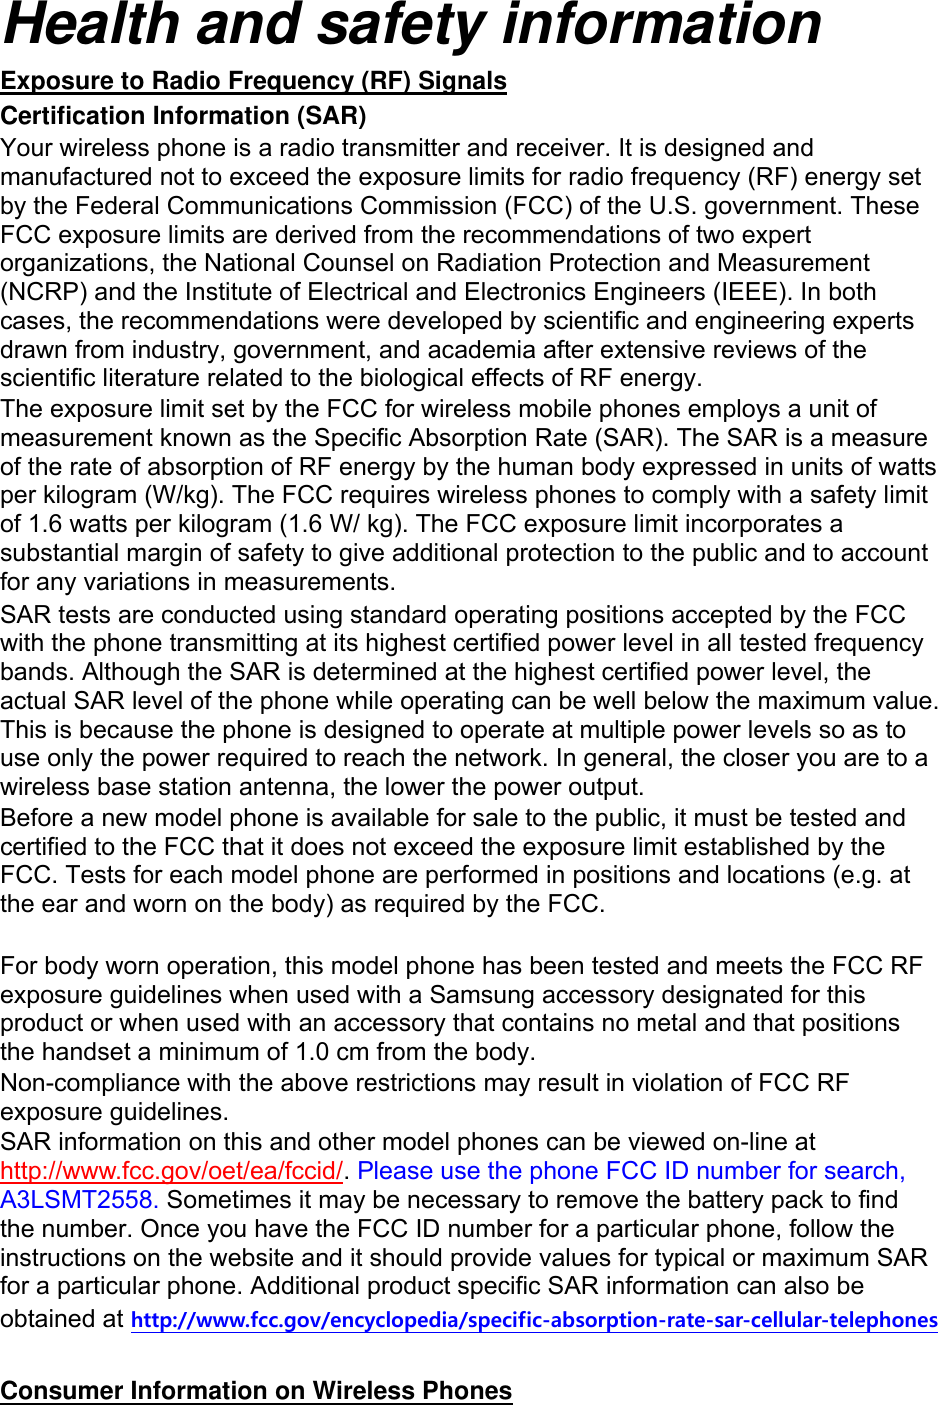 Health and safety information Exposure to Radio Frequency (RF) Signals Certification Information (SAR) Your wireless phone is a radio transmitter and receiver. It is designed and manufactured not to exceed the exposure limits for radio frequency (RF) energy set by the Federal Communications Commission (FCC) of the U.S. government. These FCC exposure limits are derived from the recommendations of two expert organizations, the National Counsel on Radiation Protection and Measurement (NCRP) and the Institute of Electrical and Electronics Engineers (IEEE). In both cases, the recommendations were developed by scientific and engineering experts drawn from industry, government, and academia after extensive reviews of the scientific literature related to the biological effects of RF energy. The exposure limit set by the FCC for wireless mobile phones employs a unit of measurement known as the Specific Absorption Rate (SAR). The SAR is a measure of the rate of absorption of RF energy by the human body expressed in units of watts per kilogram (W/kg). The FCC requires wireless phones to comply with a safety limit of 1.6 watts per kilogram (1.6 W/ kg). The FCC exposure limit incorporates a substantial margin of safety to give additional protection to the public and to account for any variations in measurements. SAR tests are conducted using standard operating positions accepted by the FCC with the phone transmitting at its highest certified power level in all tested frequency bands. Although the SAR is determined at the highest certified power level, the actual SAR level of the phone while operating can be well below the maximum value. This is because the phone is designed to operate at multiple power levels so as to use only the power required to reach the network. In general, the closer you are to a wireless base station antenna, the lower the power output. Before a new model phone is available for sale to the public, it must be tested and certified to the FCC that it does not exceed the exposure limit established by the FCC. Tests for each model phone are performed in positions and locations (e.g. at the ear and worn on the body) as required by the FCC.      For body worn operation, this model phone has been tested and meets the FCC RF exposure guidelines when used with a Samsung accessory designated for this product or when used with an accessory that contains no metal and that positions the handset a minimum of 1.0 cm from the body.   Non-compliance with the above restrictions may result in violation of FCC RF exposure guidelines. SAR information on this and other model phones can be viewed on-line at http://www.fcc.gov/oet/ea/fccid/. Please use the phone FCC ID number for search, A3LSMT2558. Sometimes it may be necessary to remove the battery pack to find the number. Once you have the FCC ID number for a particular phone, follow the instructions on the website and it should provide values for typical or maximum SAR for a particular phone. Additional product specific SAR information can also be obtained at http://www.fcc.gov/encyclopedia/specific-absorption-rate-sar-cellular-telephones  Consumer Information on Wireless Phones 